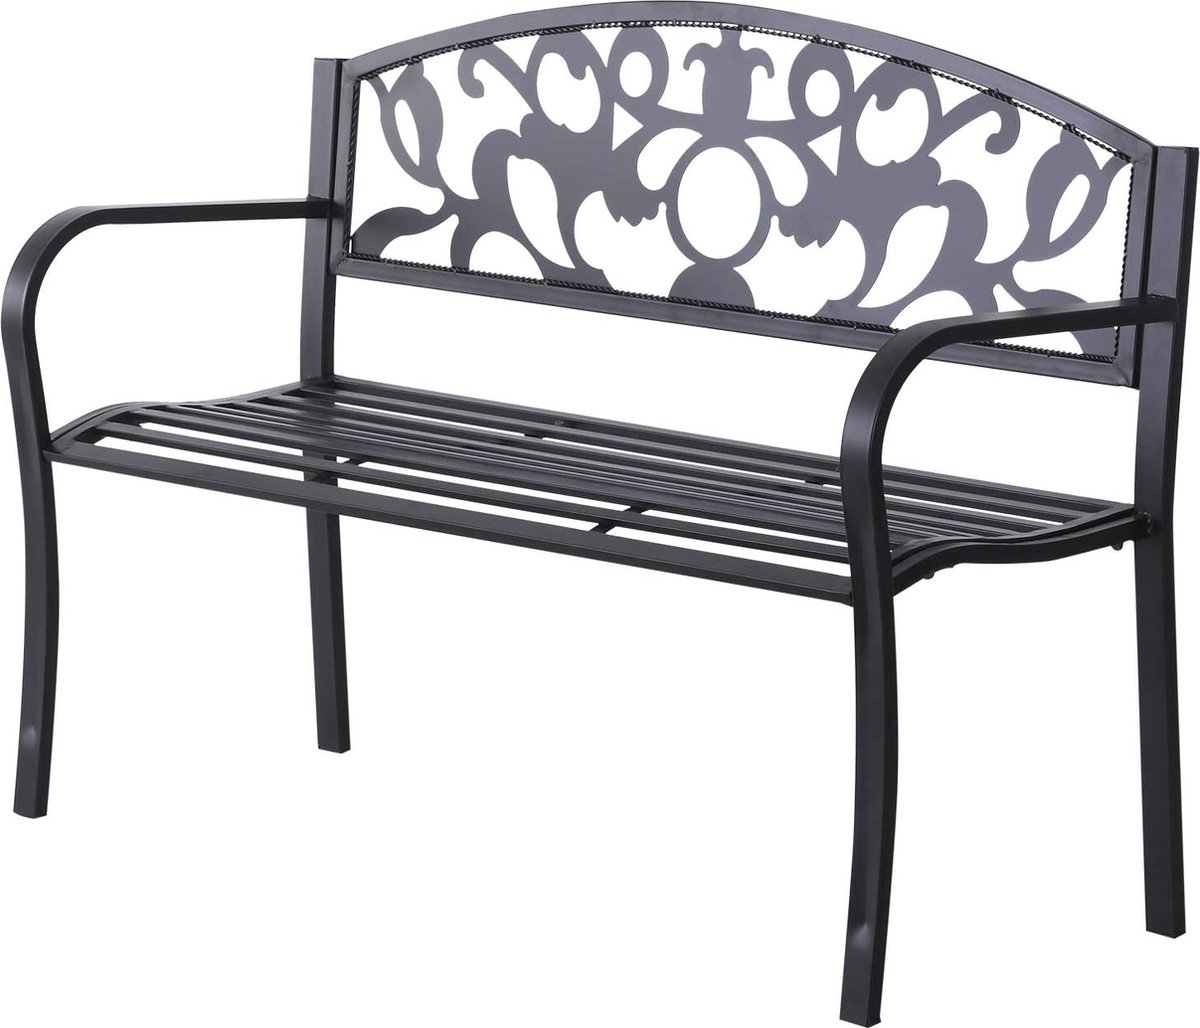 CGPN 2 Seater Sofa Garden Bench Metal Bench with Armrests Country Style Metal Black 128 x 50 x 91 cm